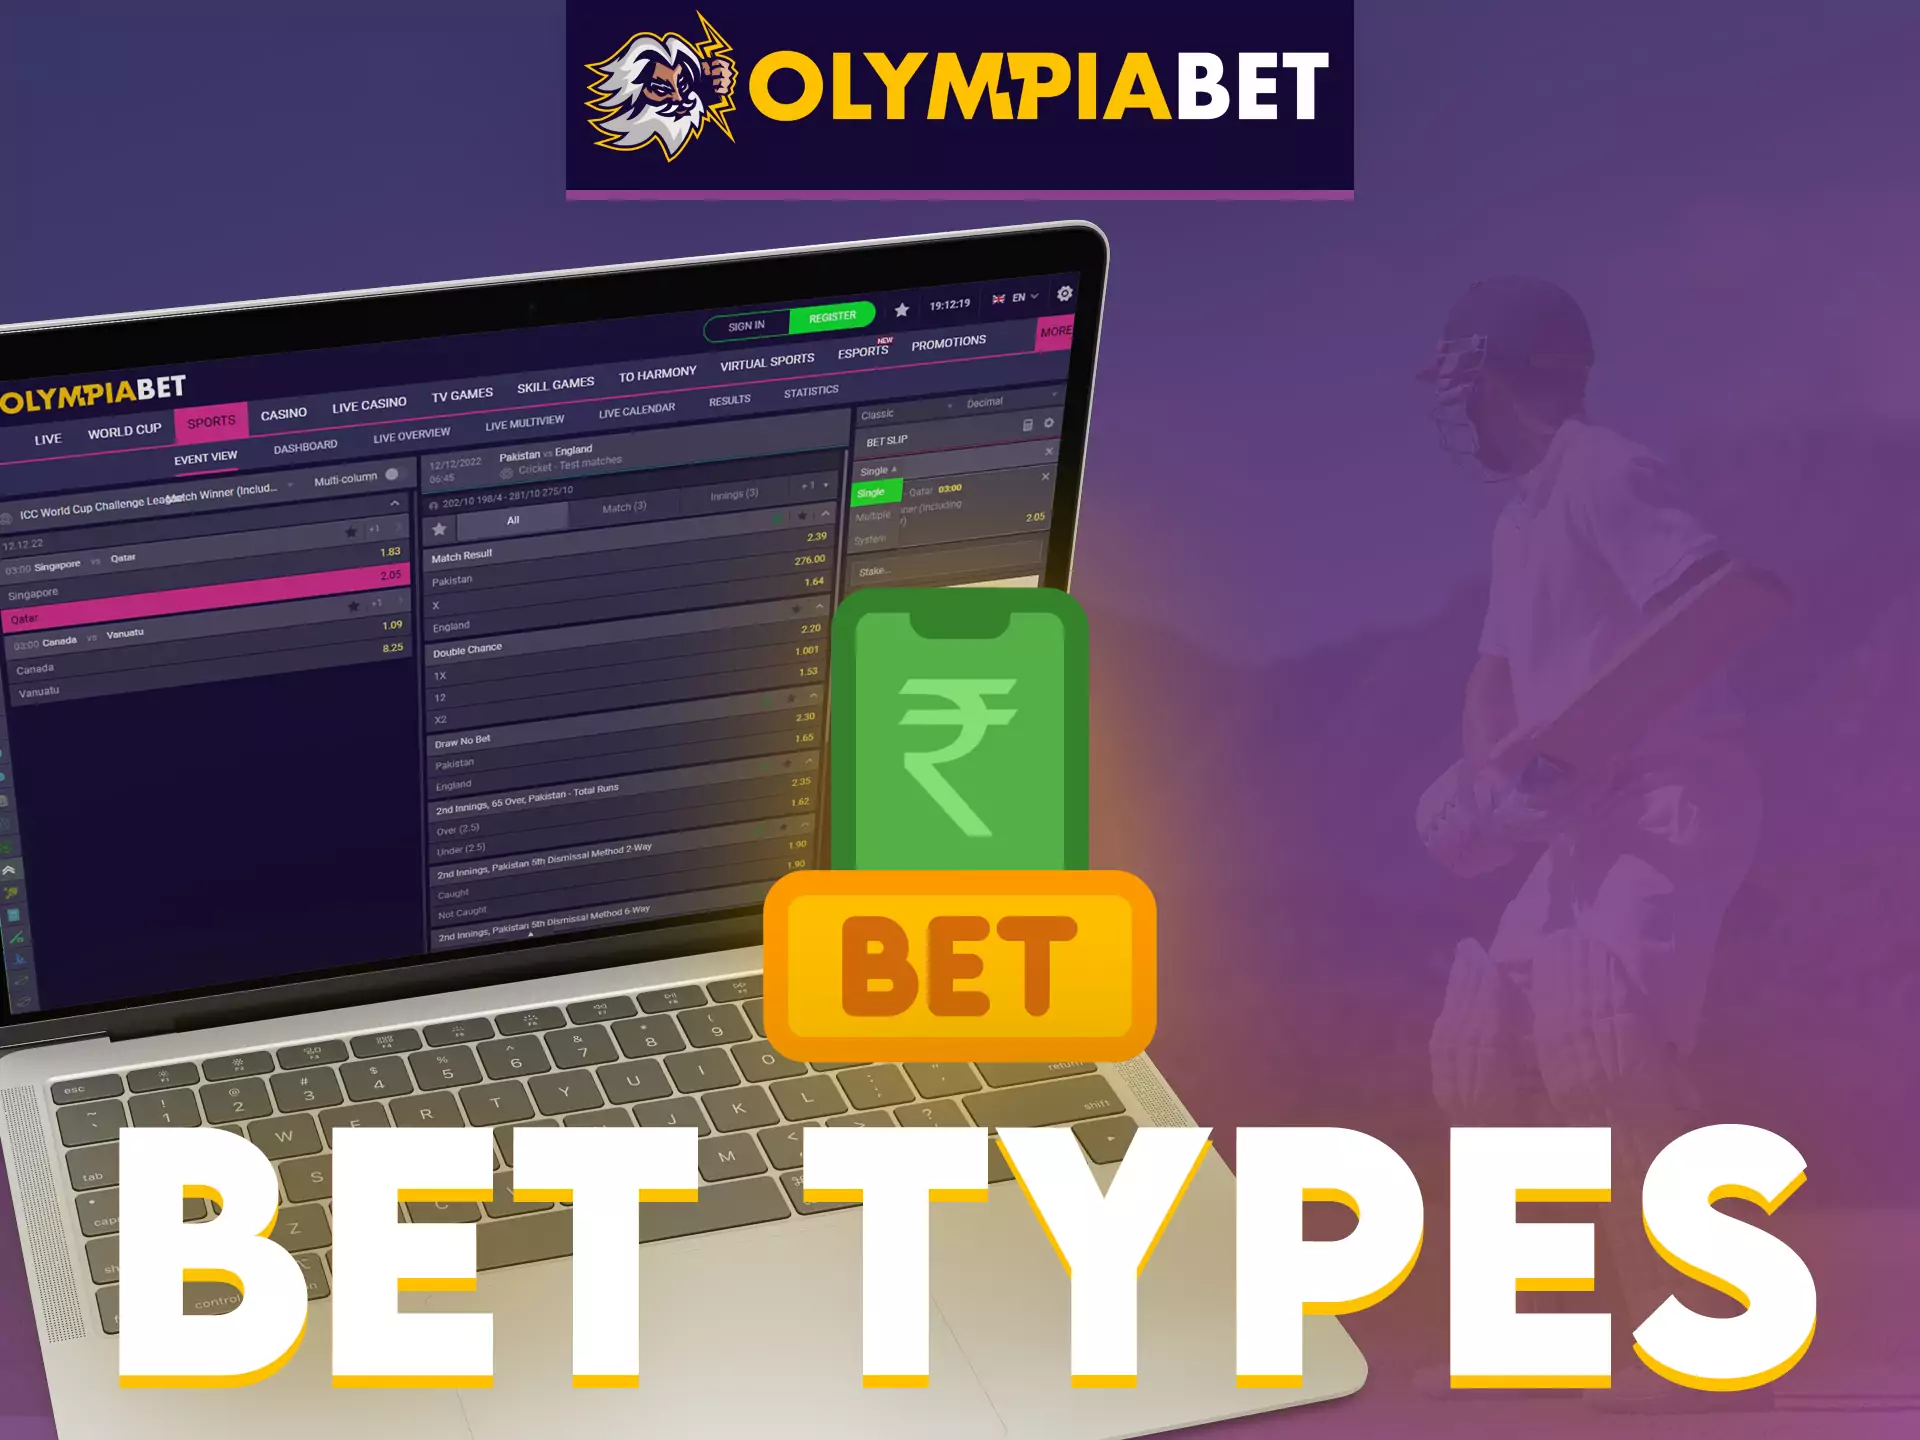 There are different types of bets in OlympiaBet, find your suitable option.